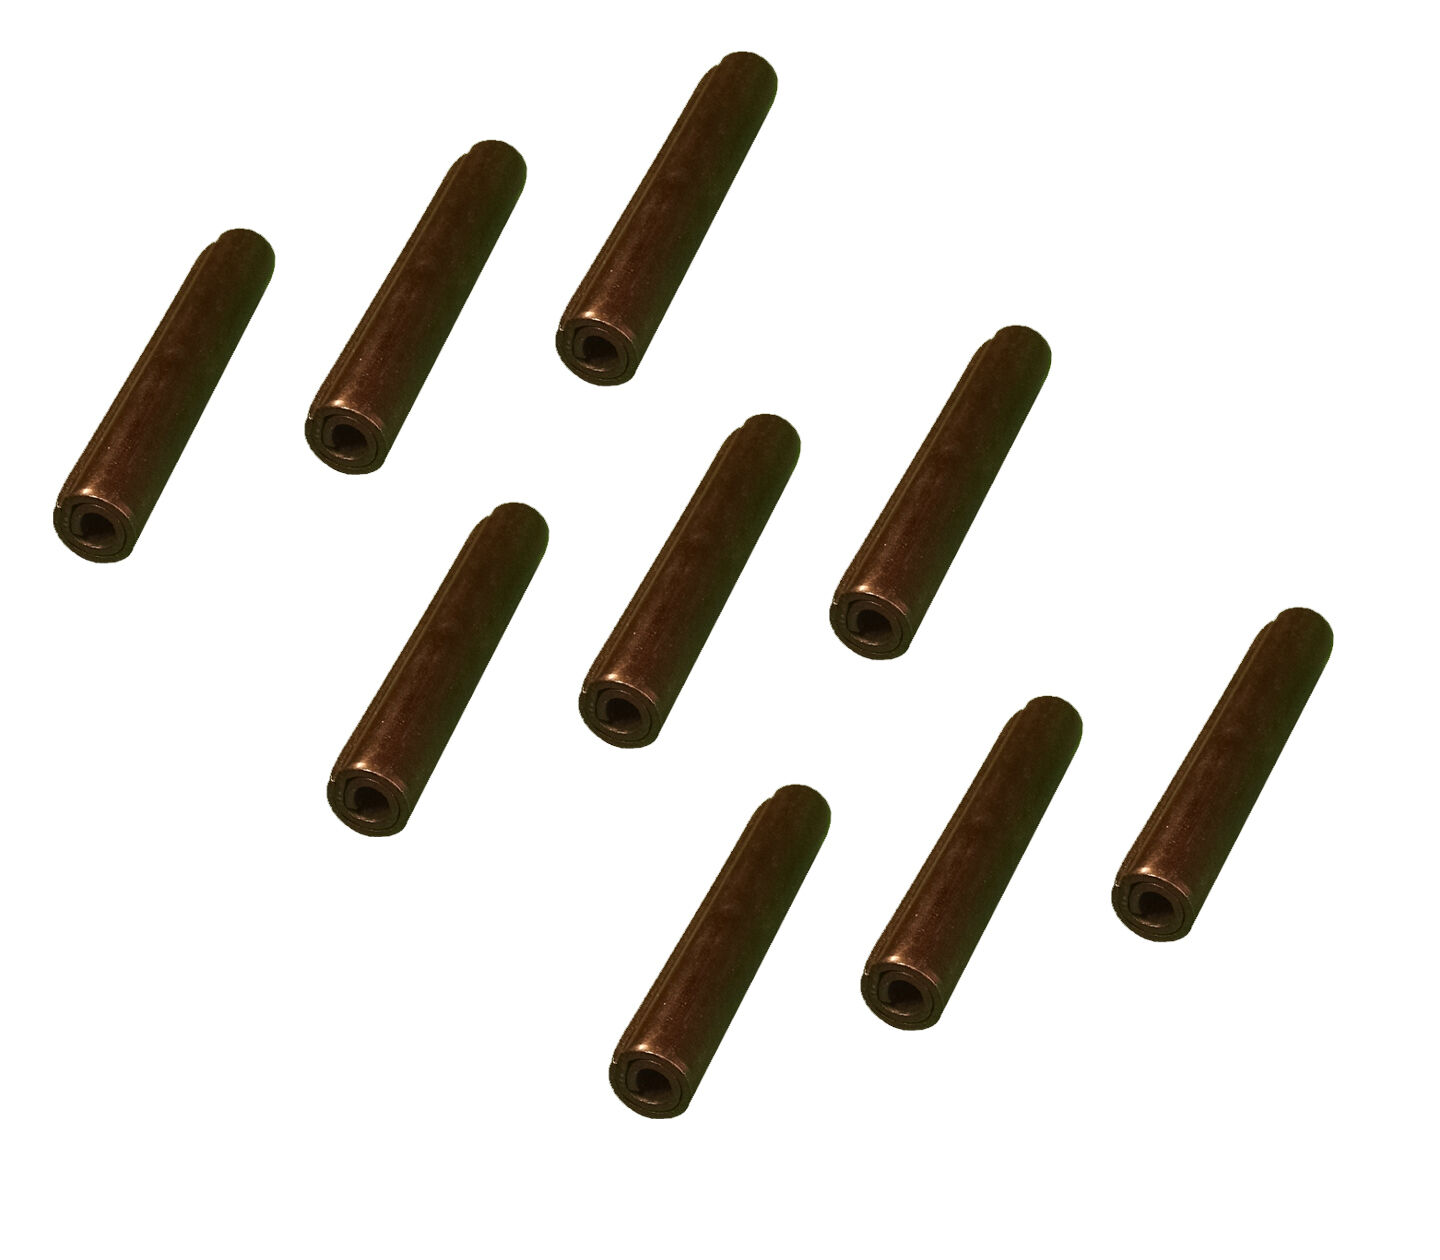 9 - Backhoe / Skid Bucket Tooth Hensley Style Roll Pins - P156